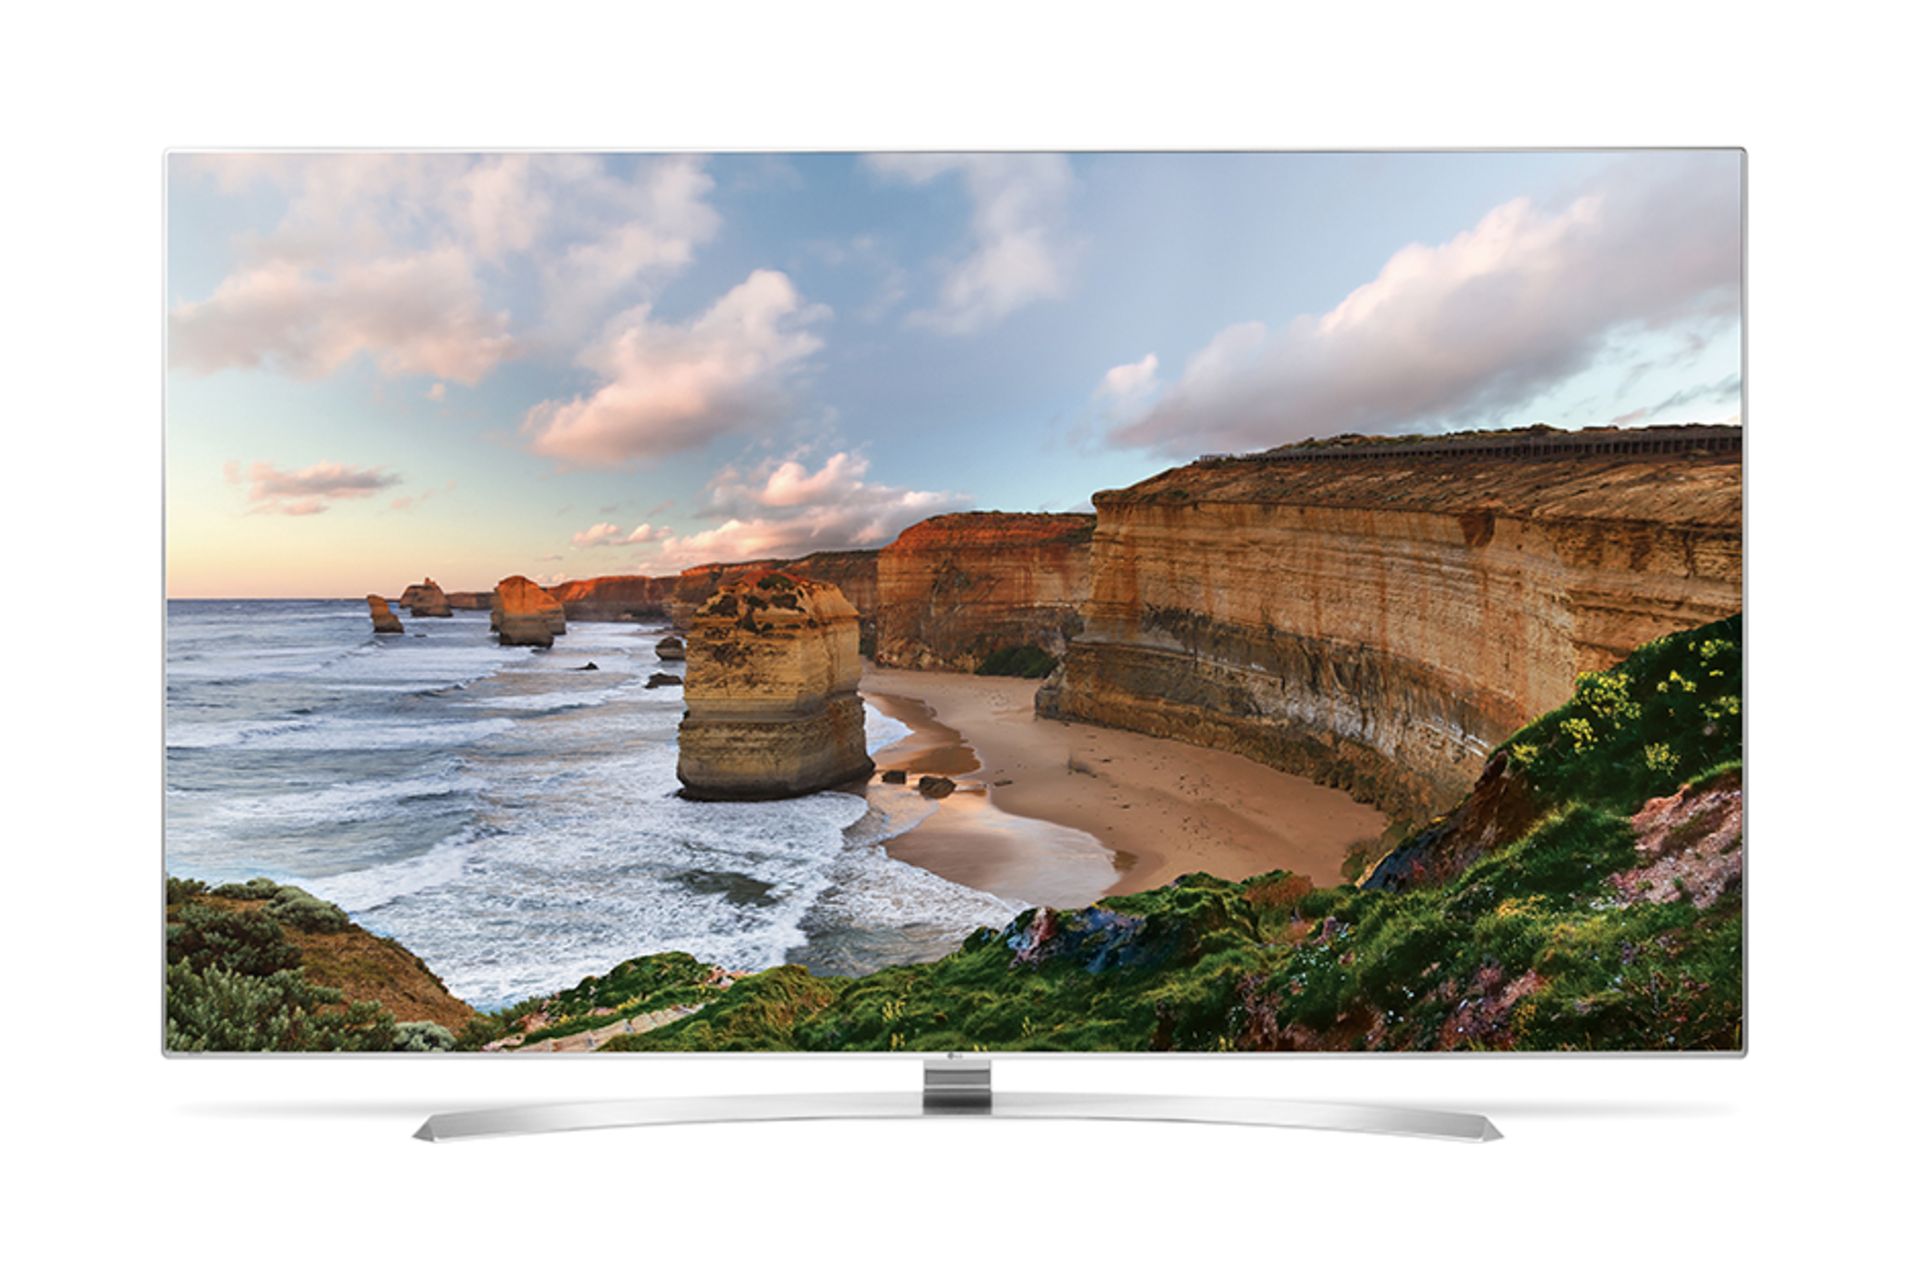 V Grade A 86" LG HDR 4K Super Ultra HD LED 3D Smart TV With WebOS 3.0 & Freeview HD & WiFi - IPS